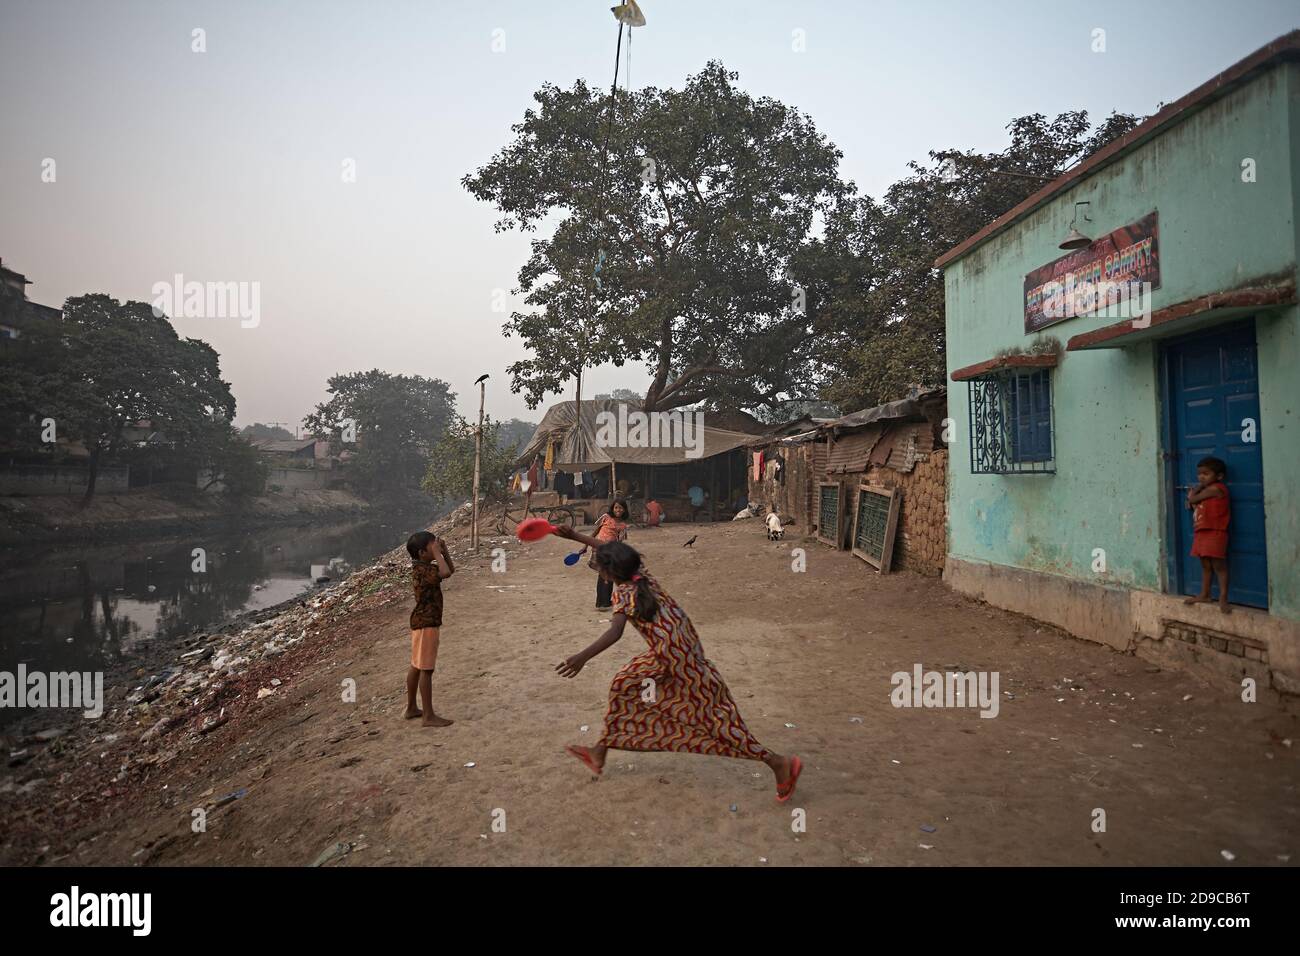 Indian cities are full of slums where the poorest people live in very poor health and hygiene conditions. Stock Photo